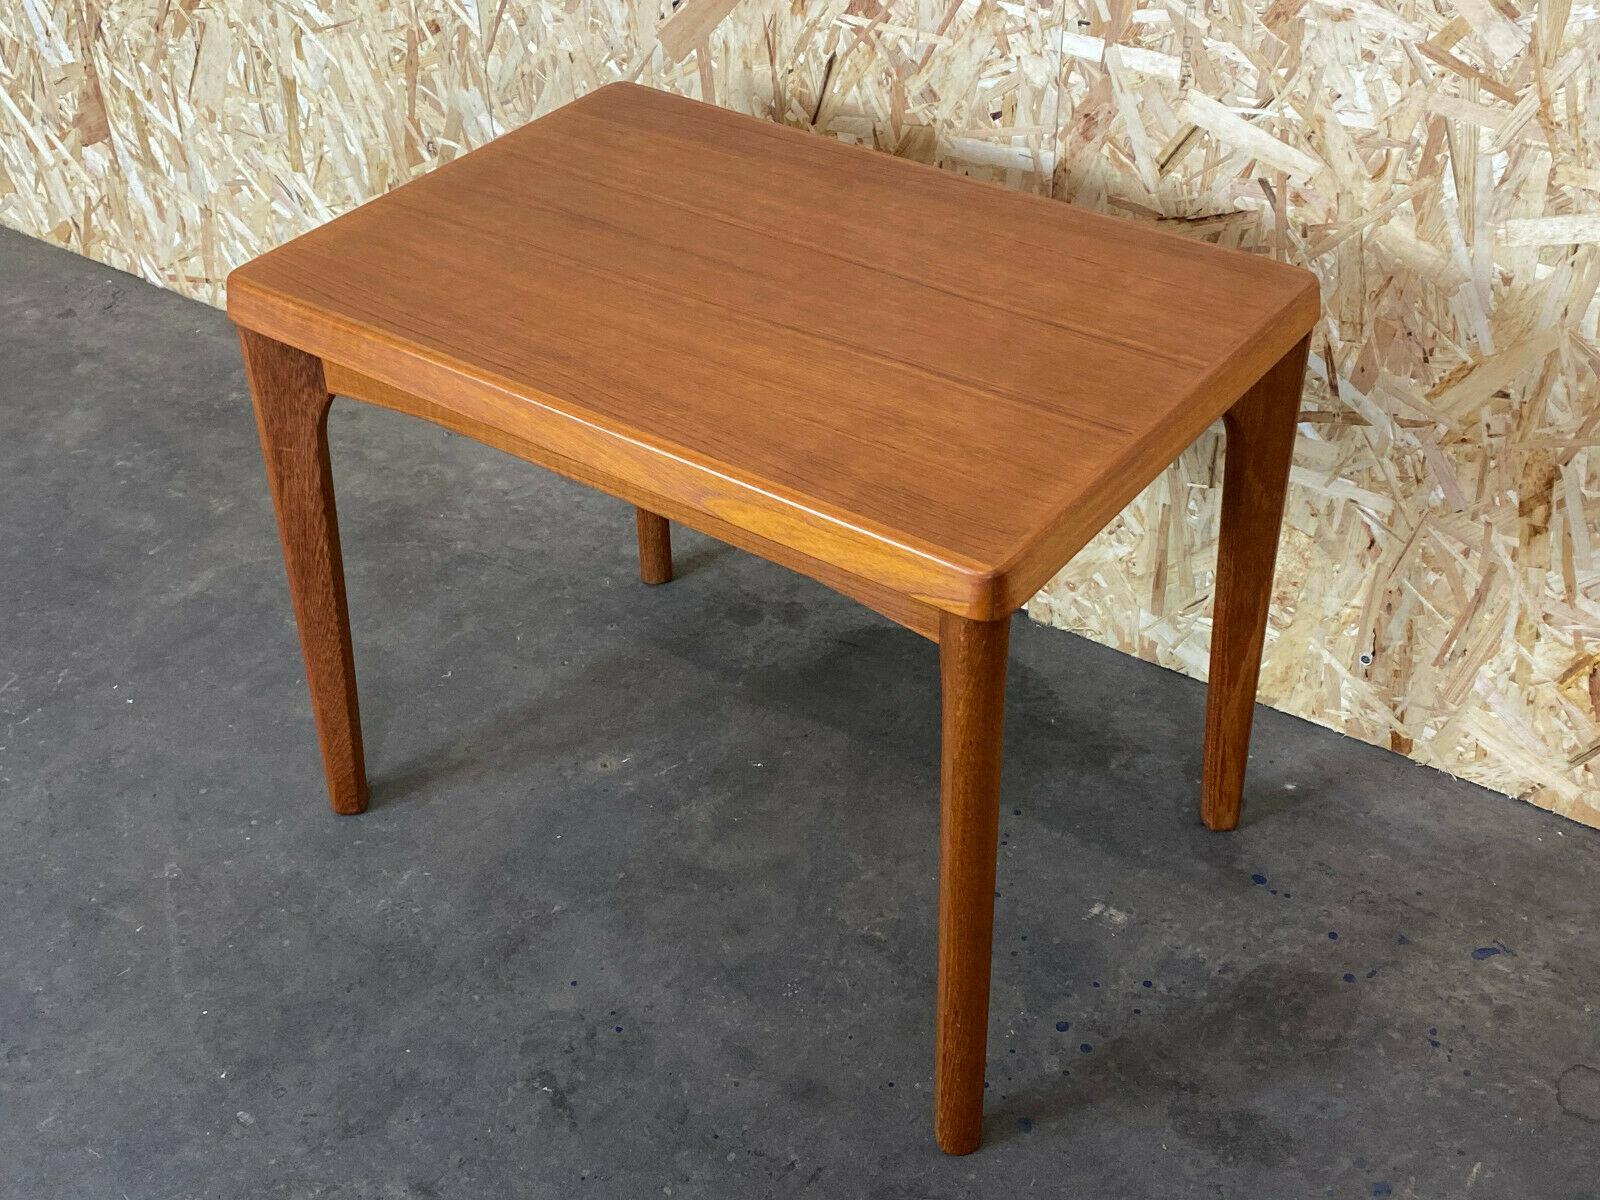 60s 70s Teak Table Coffee Table Coffee Table Henning Kjaernulf Design 70s

Object: coffee table / side table

Manufacturer:

Condition: good

Age: around 1960-1970

Dimensions:

64.5cm x 45cm x 50.5cm

Other notes:

The pictures